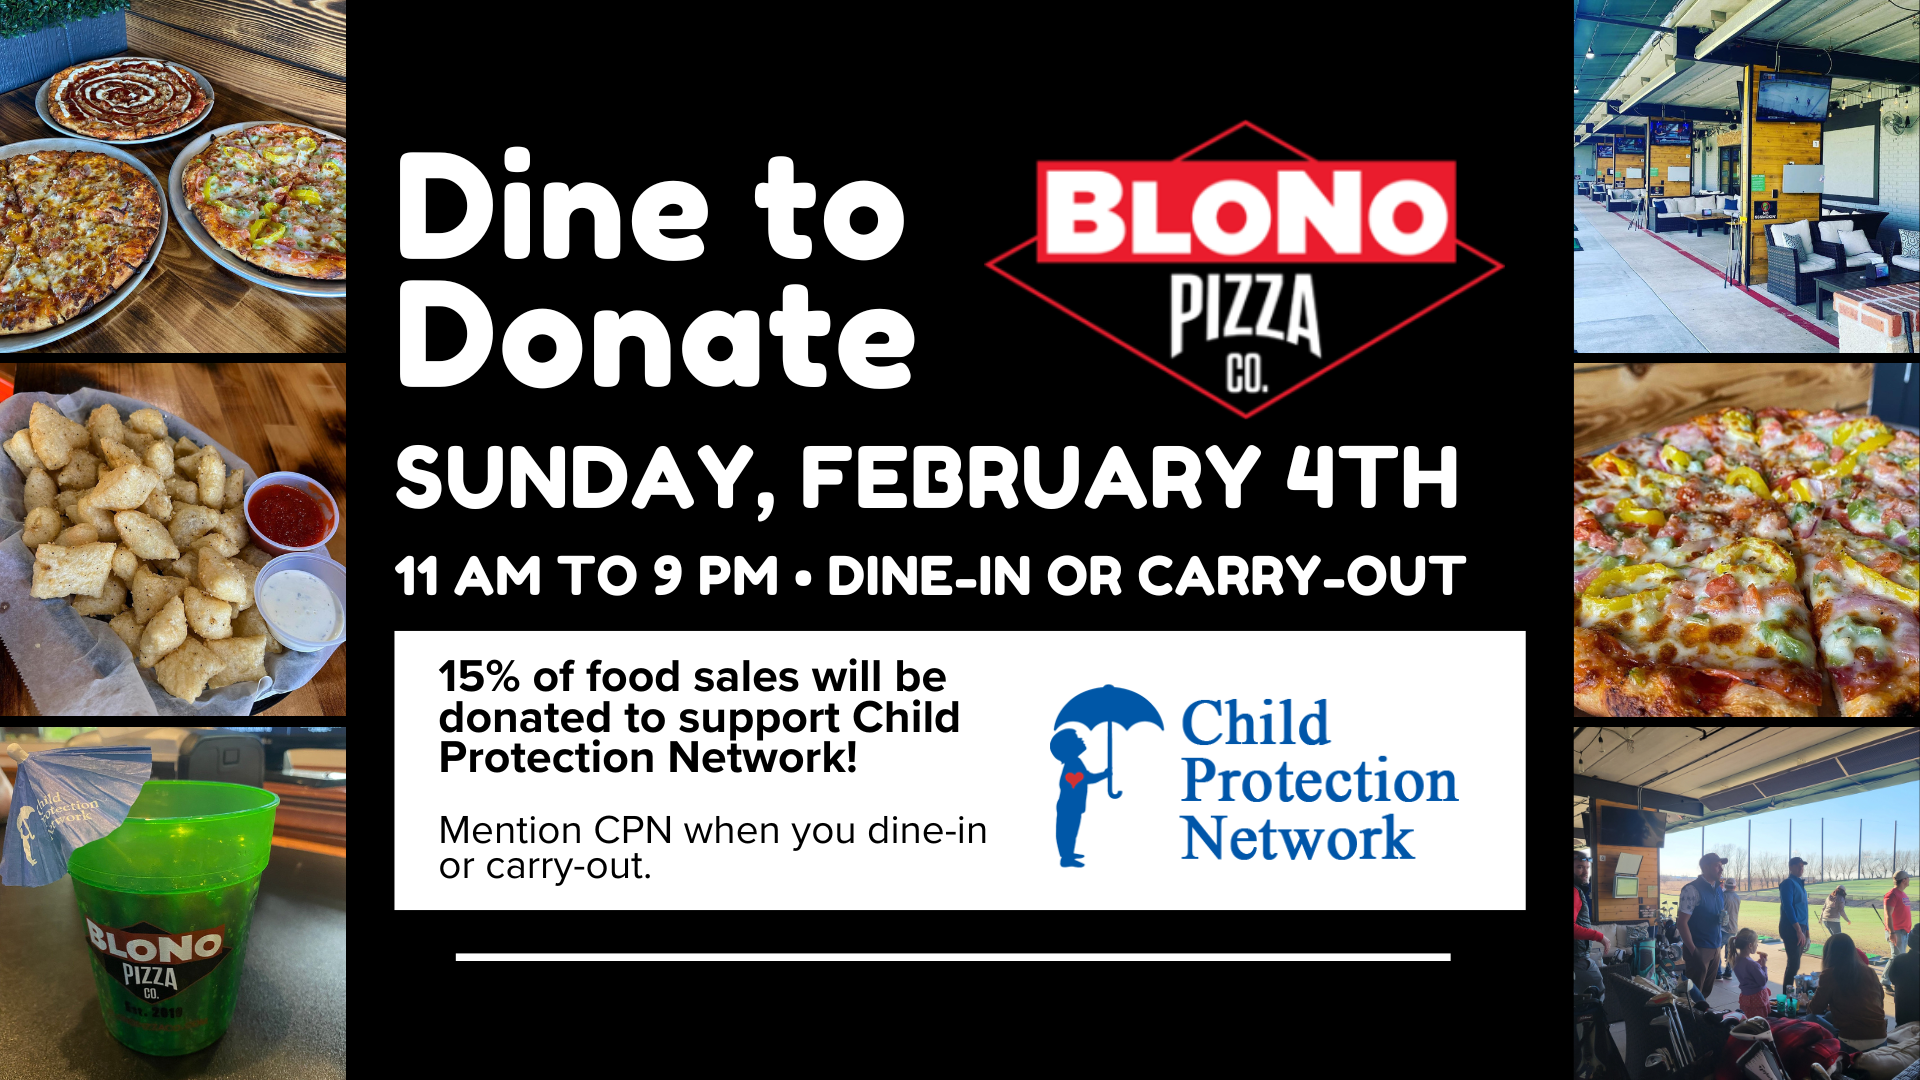 Dine to Donate at BloNo Pizza for Child Protection Network